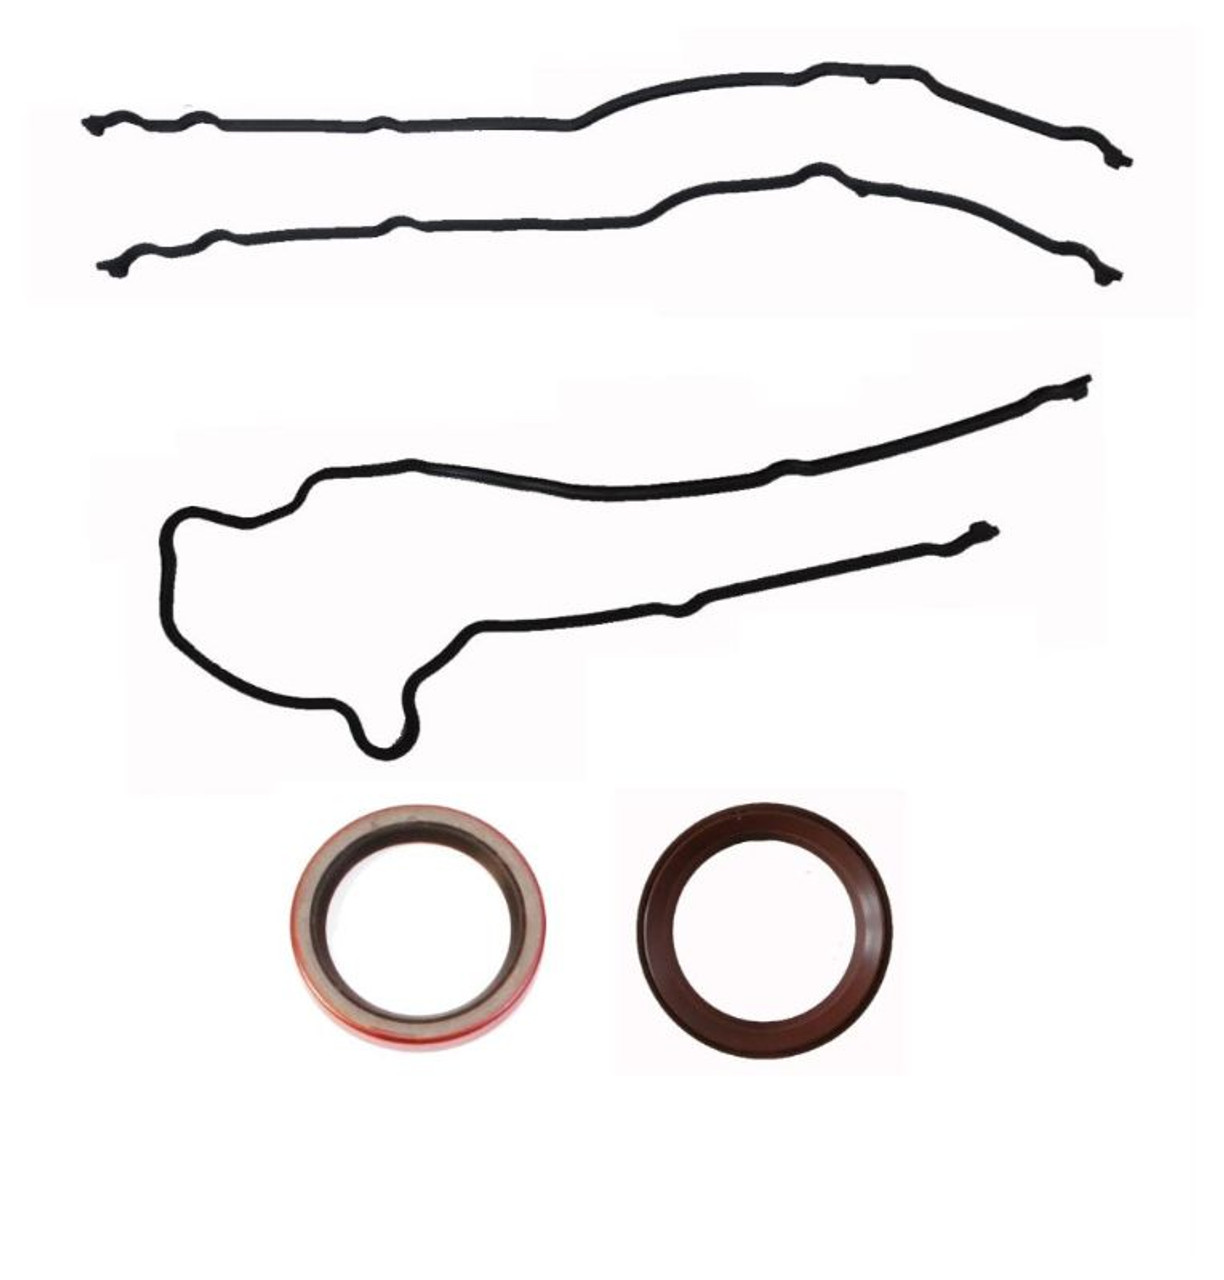 2000 Ford Expedition 5.4L Engine Timing Cover Gasket Set TCF330-A -83